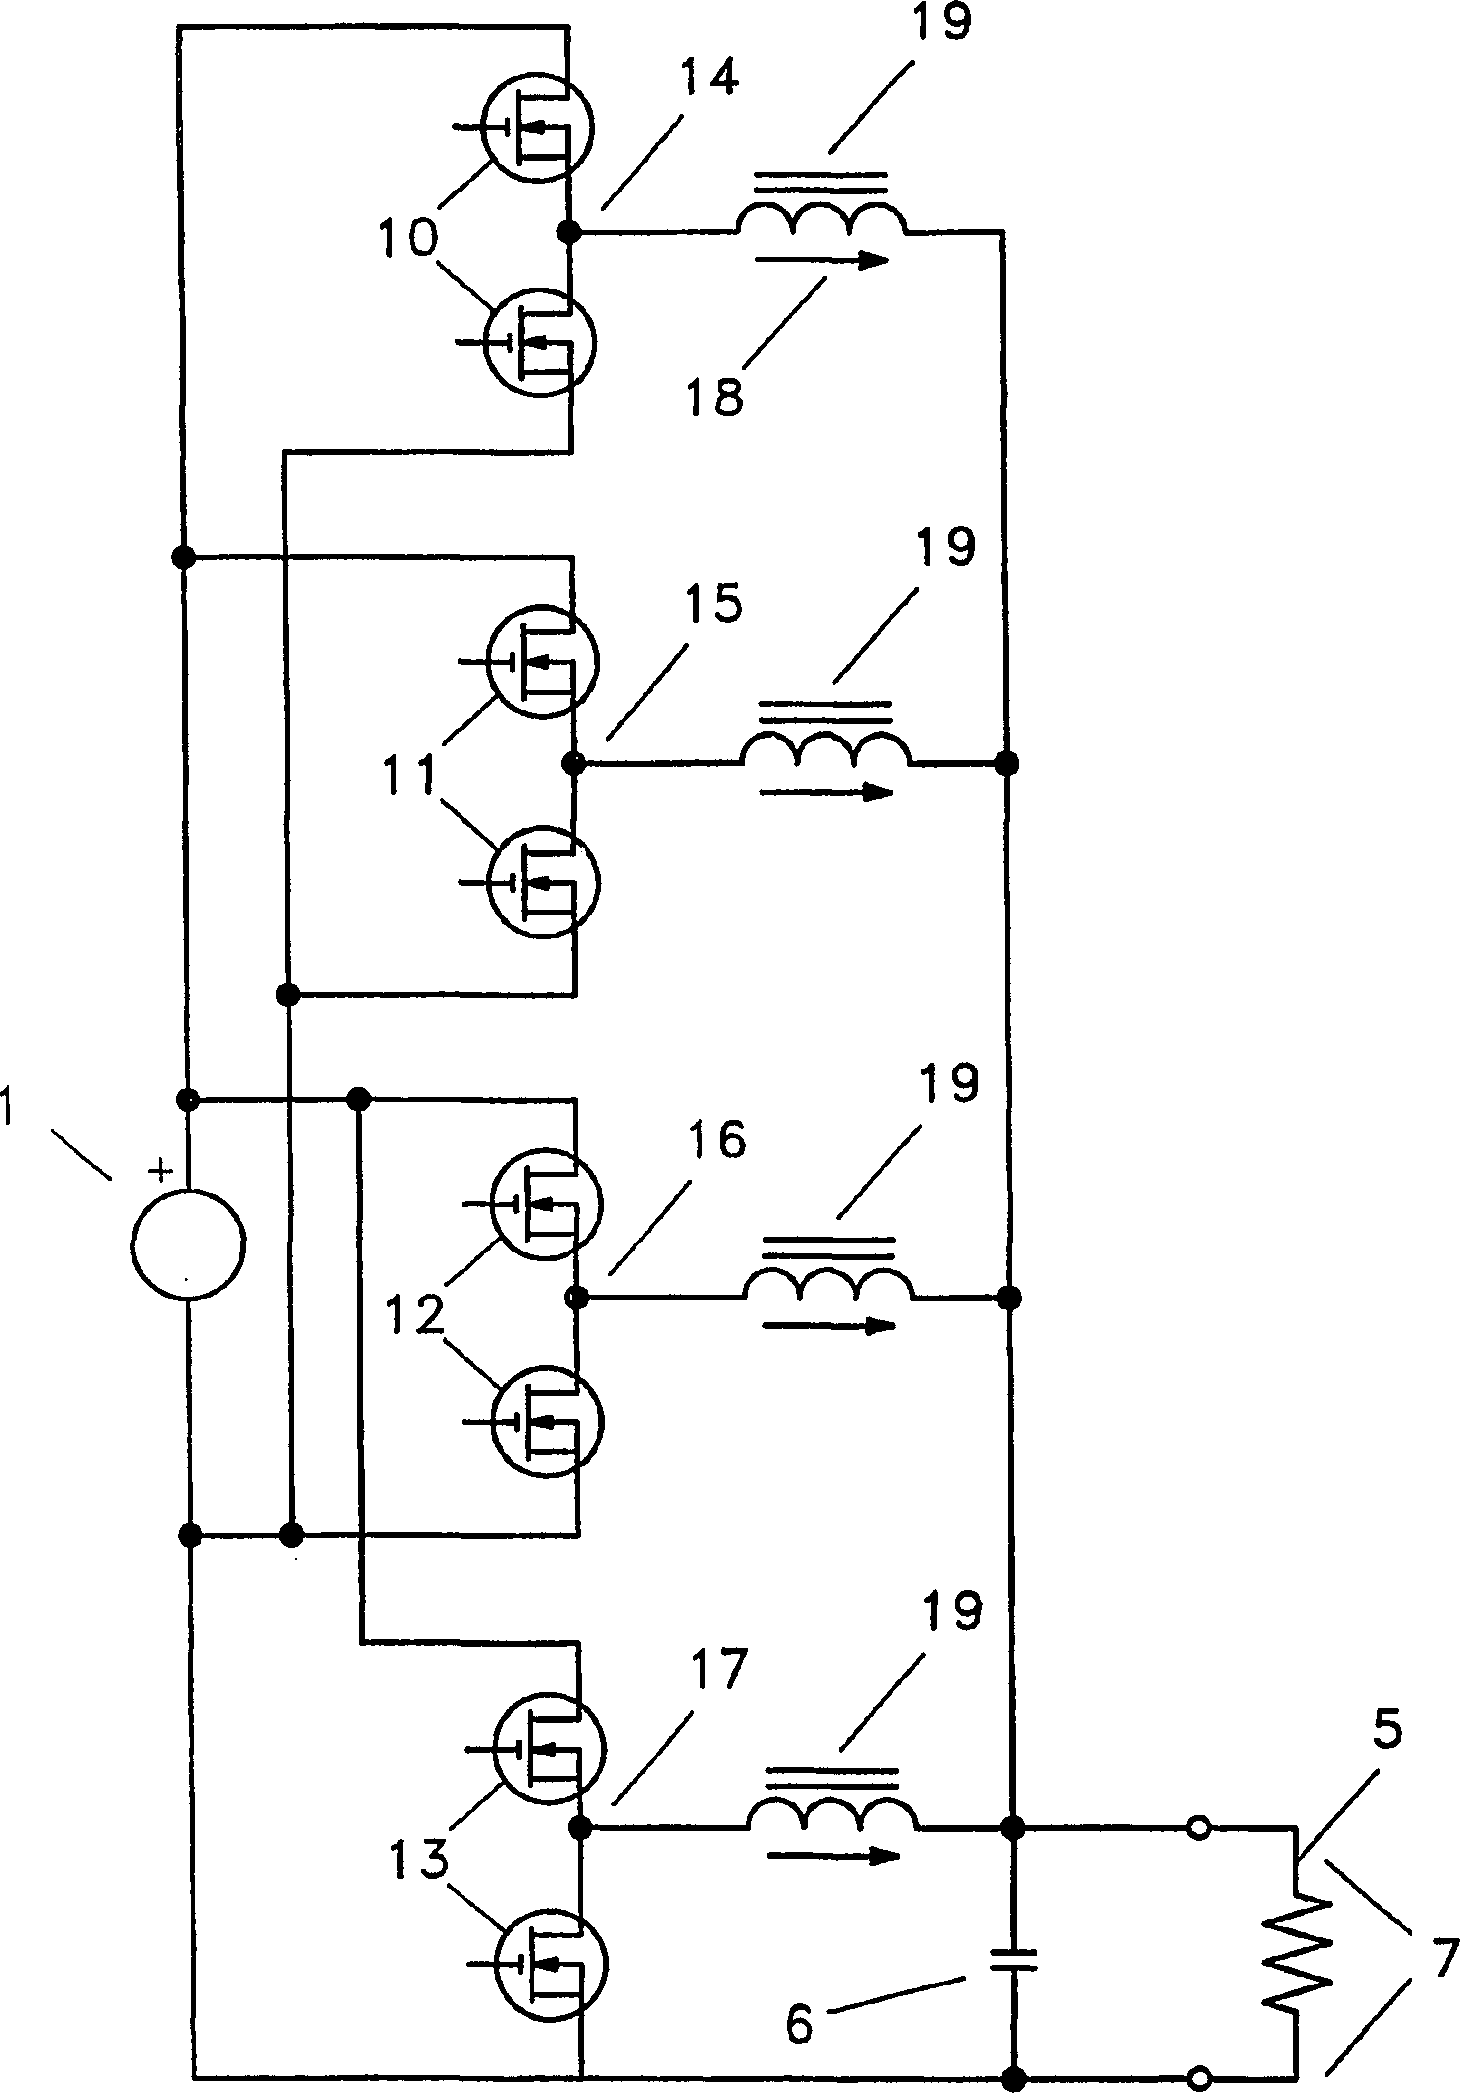 Multiple power converter system using combining transformers